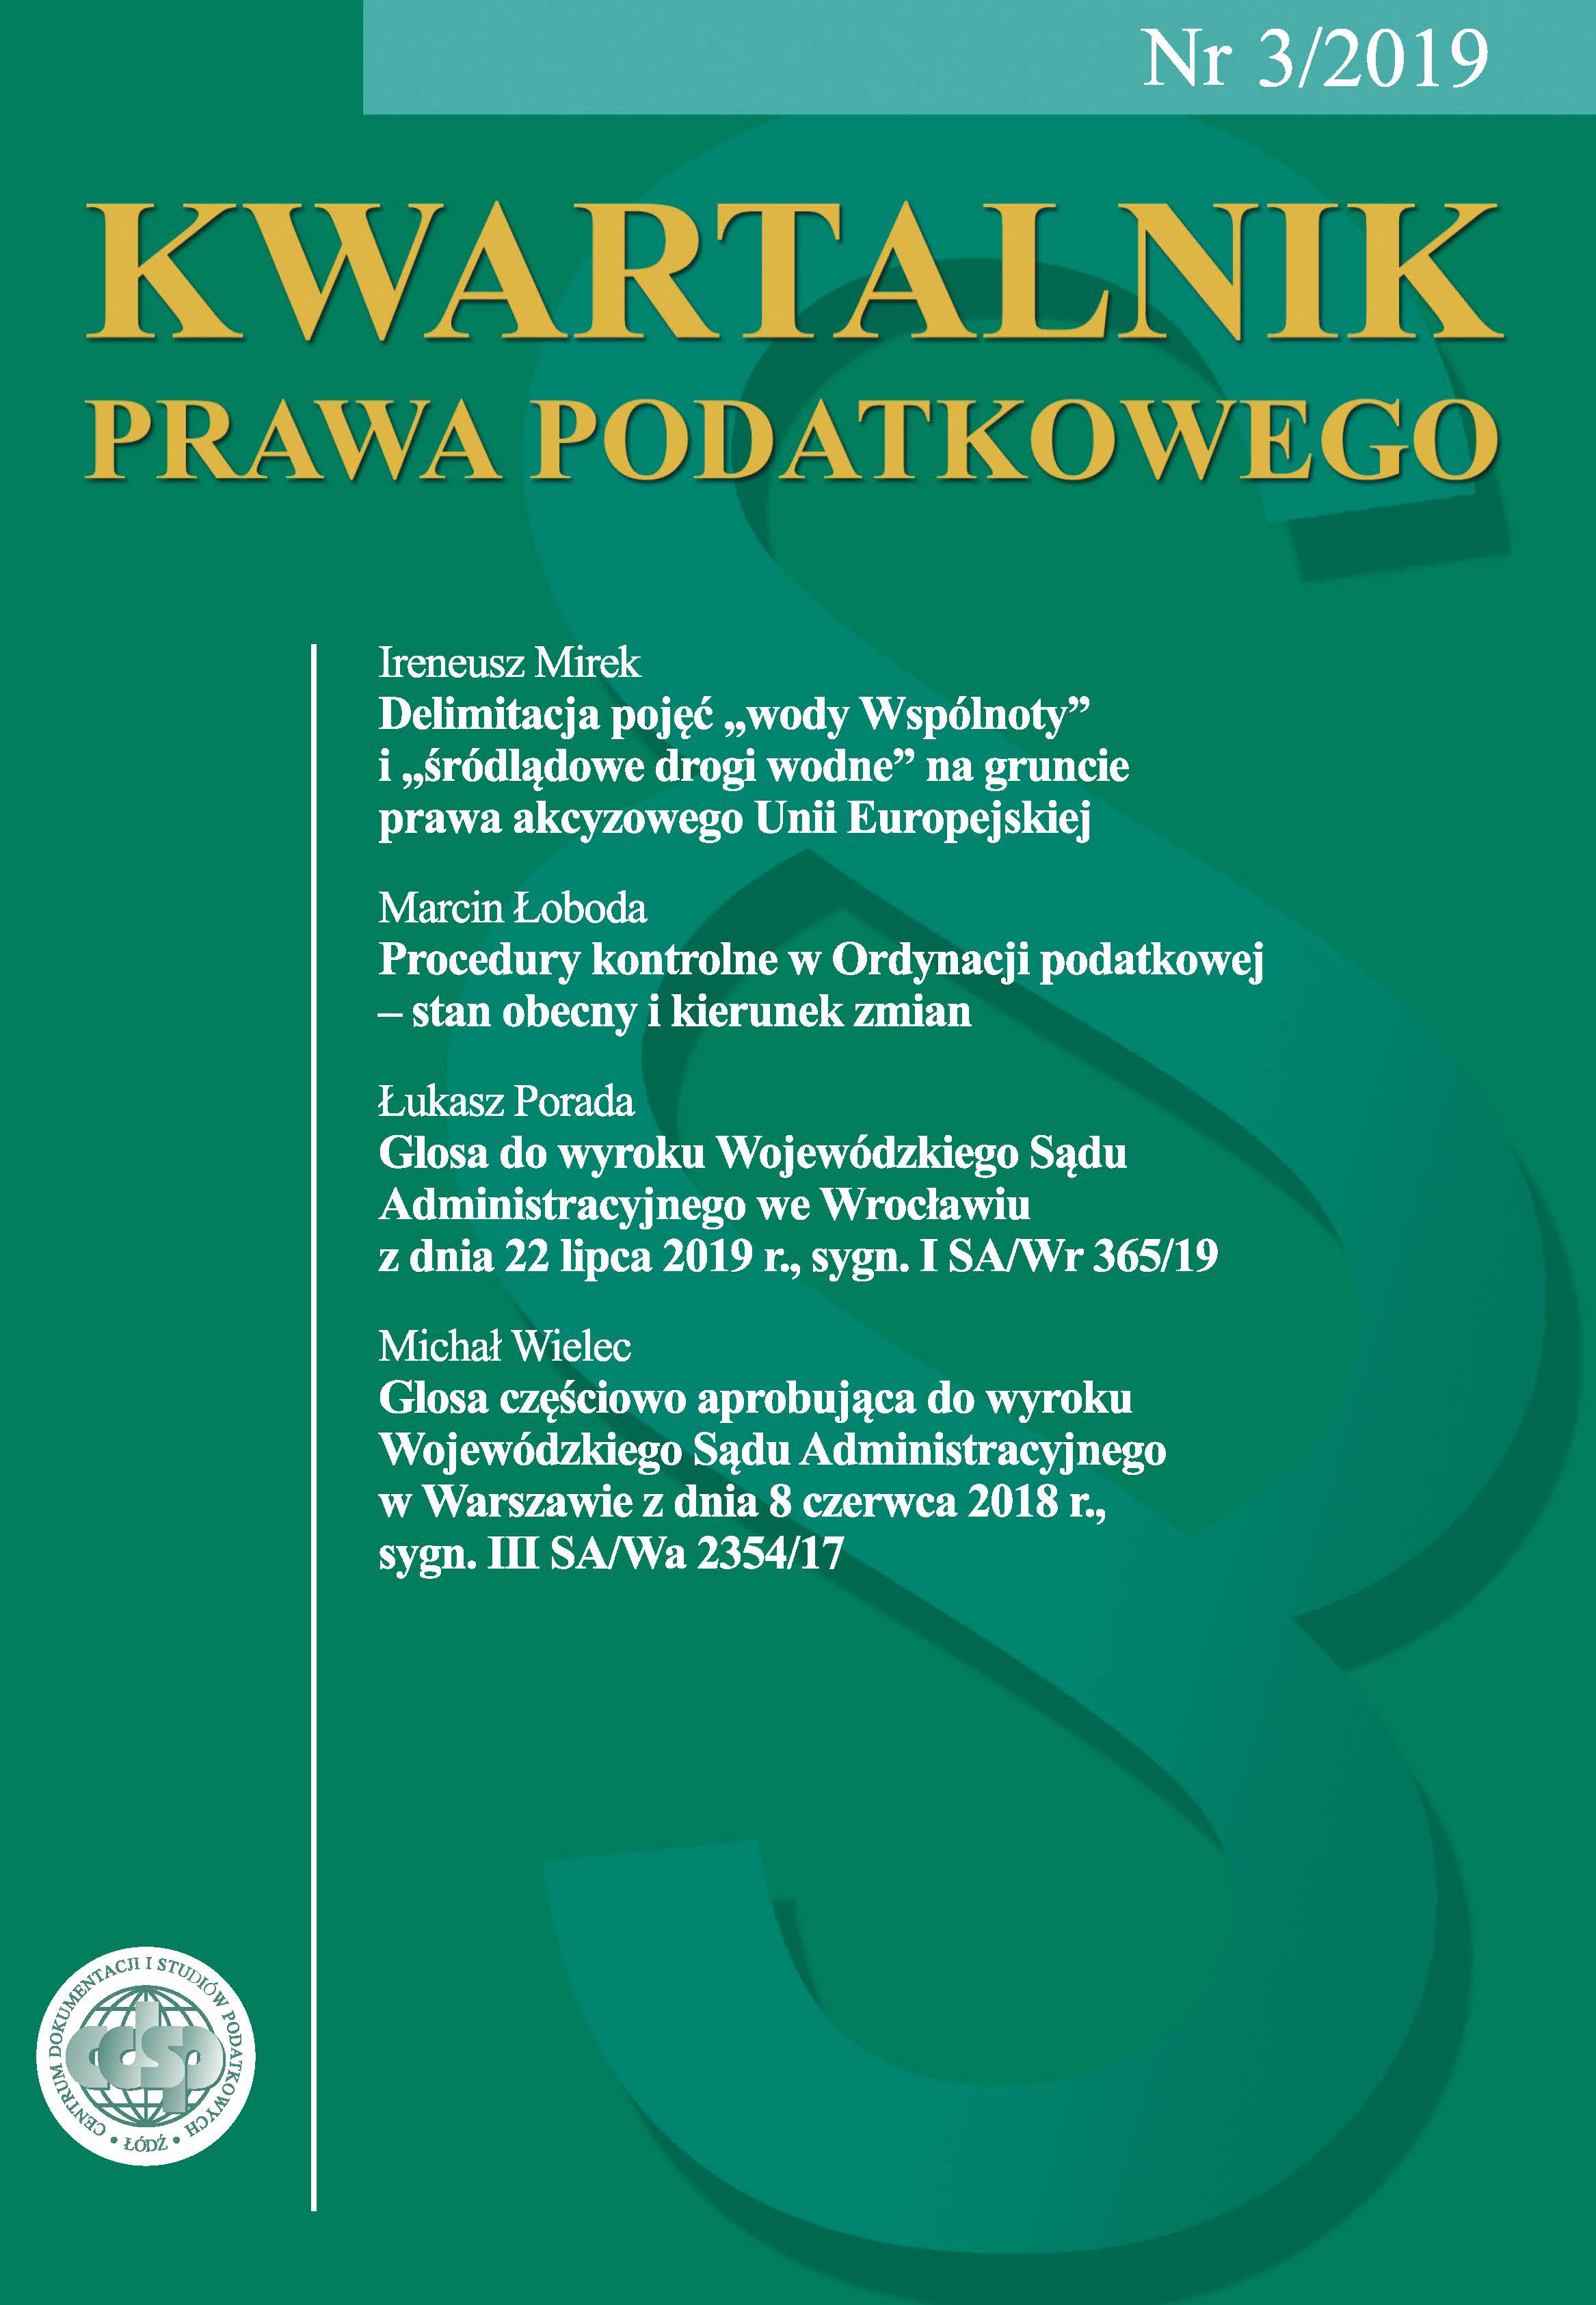 Partially approving commentary to the Regional Administrative Court in Warsaw judgment of 8 June 2018 (III SA/Wa 2354/17) Cover Image